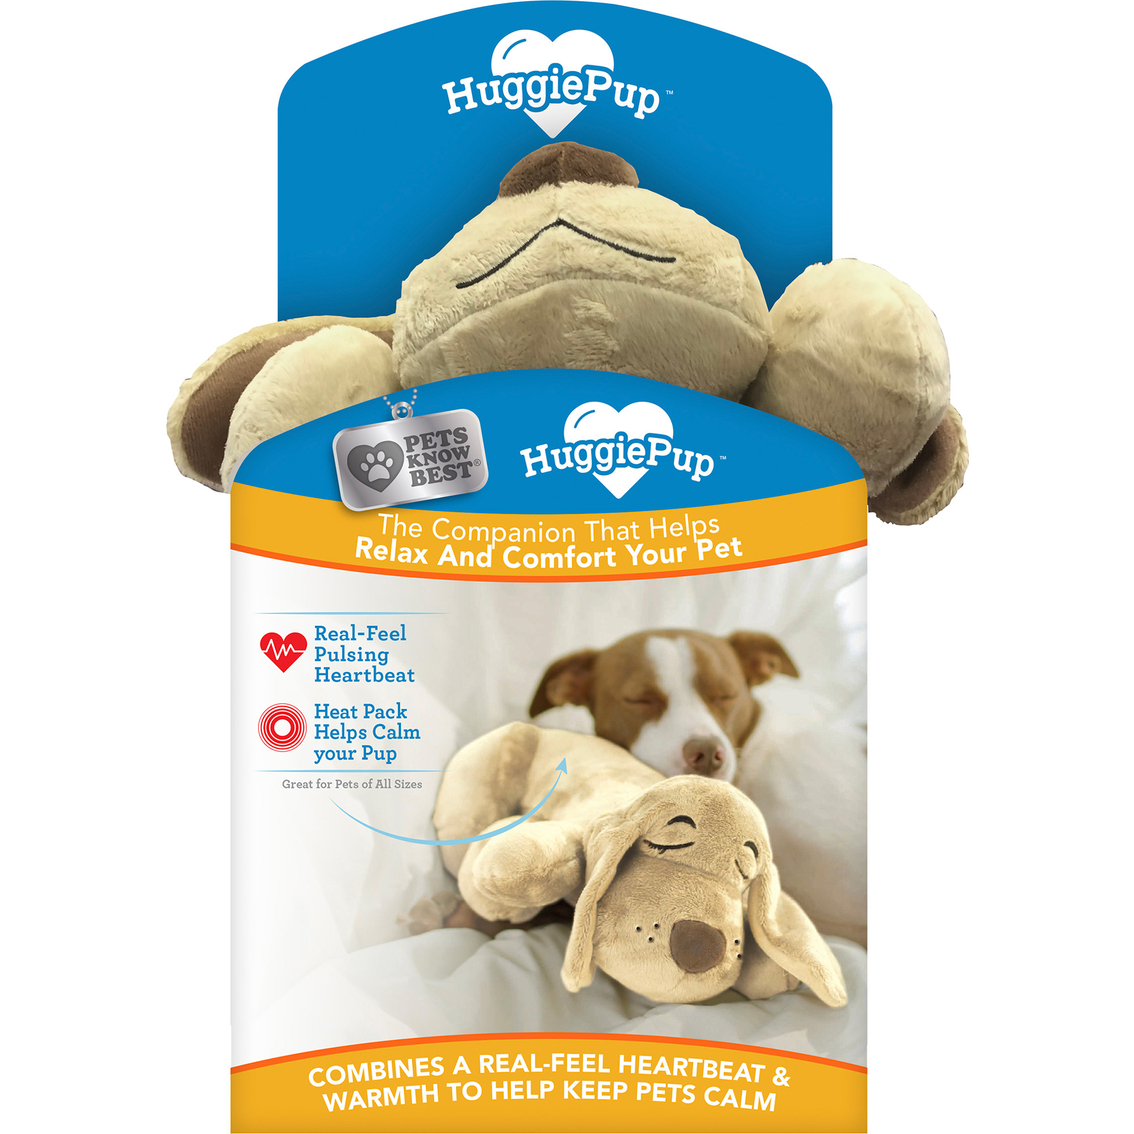 Pets Know Best Huggie Pup Dog Toy - Image 7 of 7